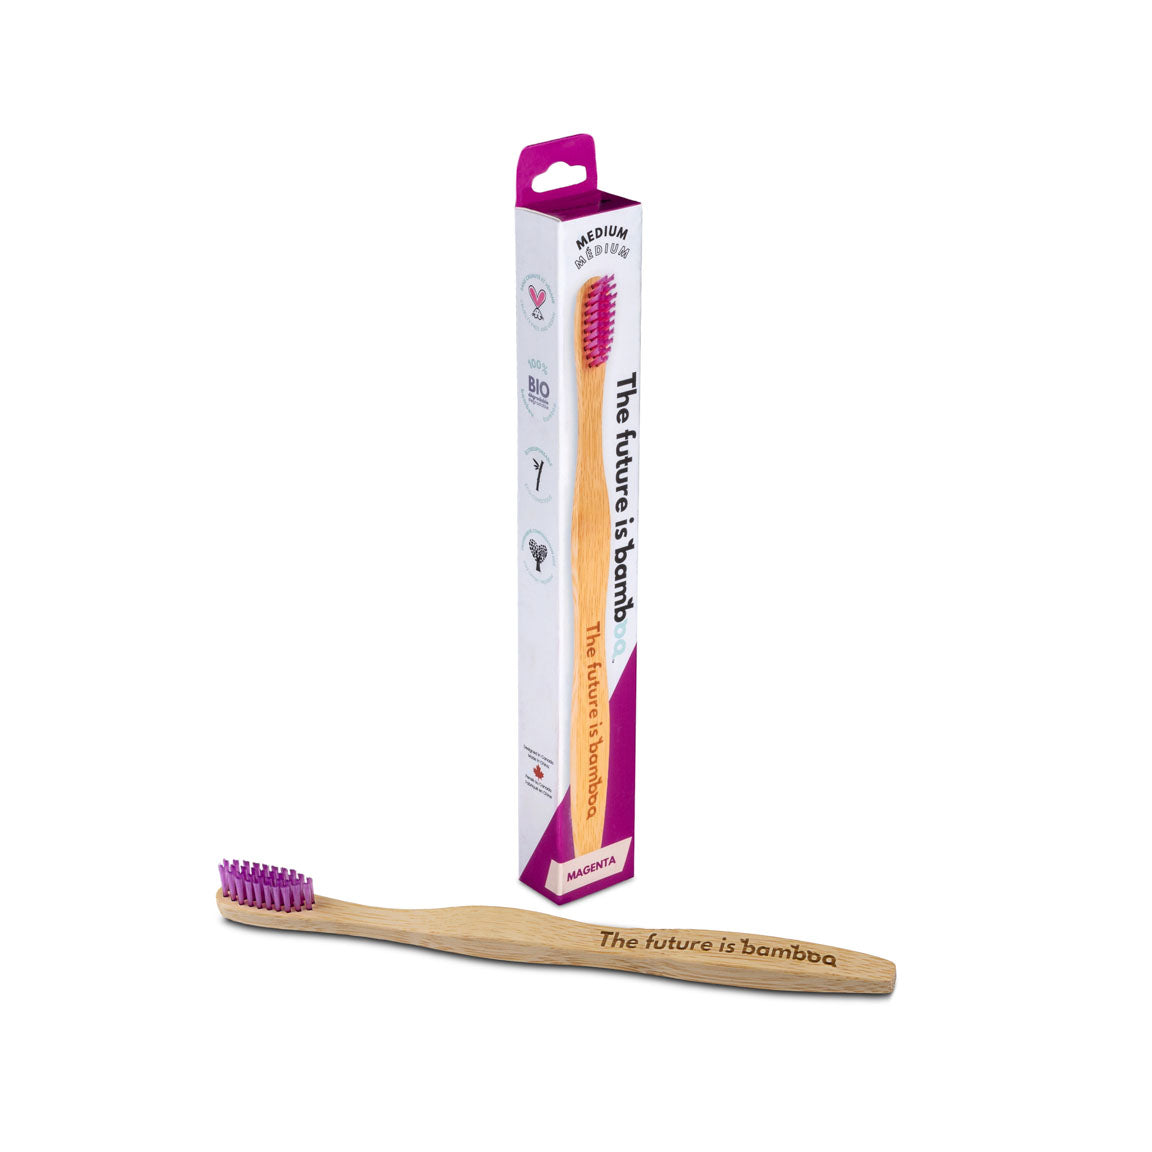 NEW! Adult MEDIUM Toothbrushes | 6-Pack - The Future is Bamboo 